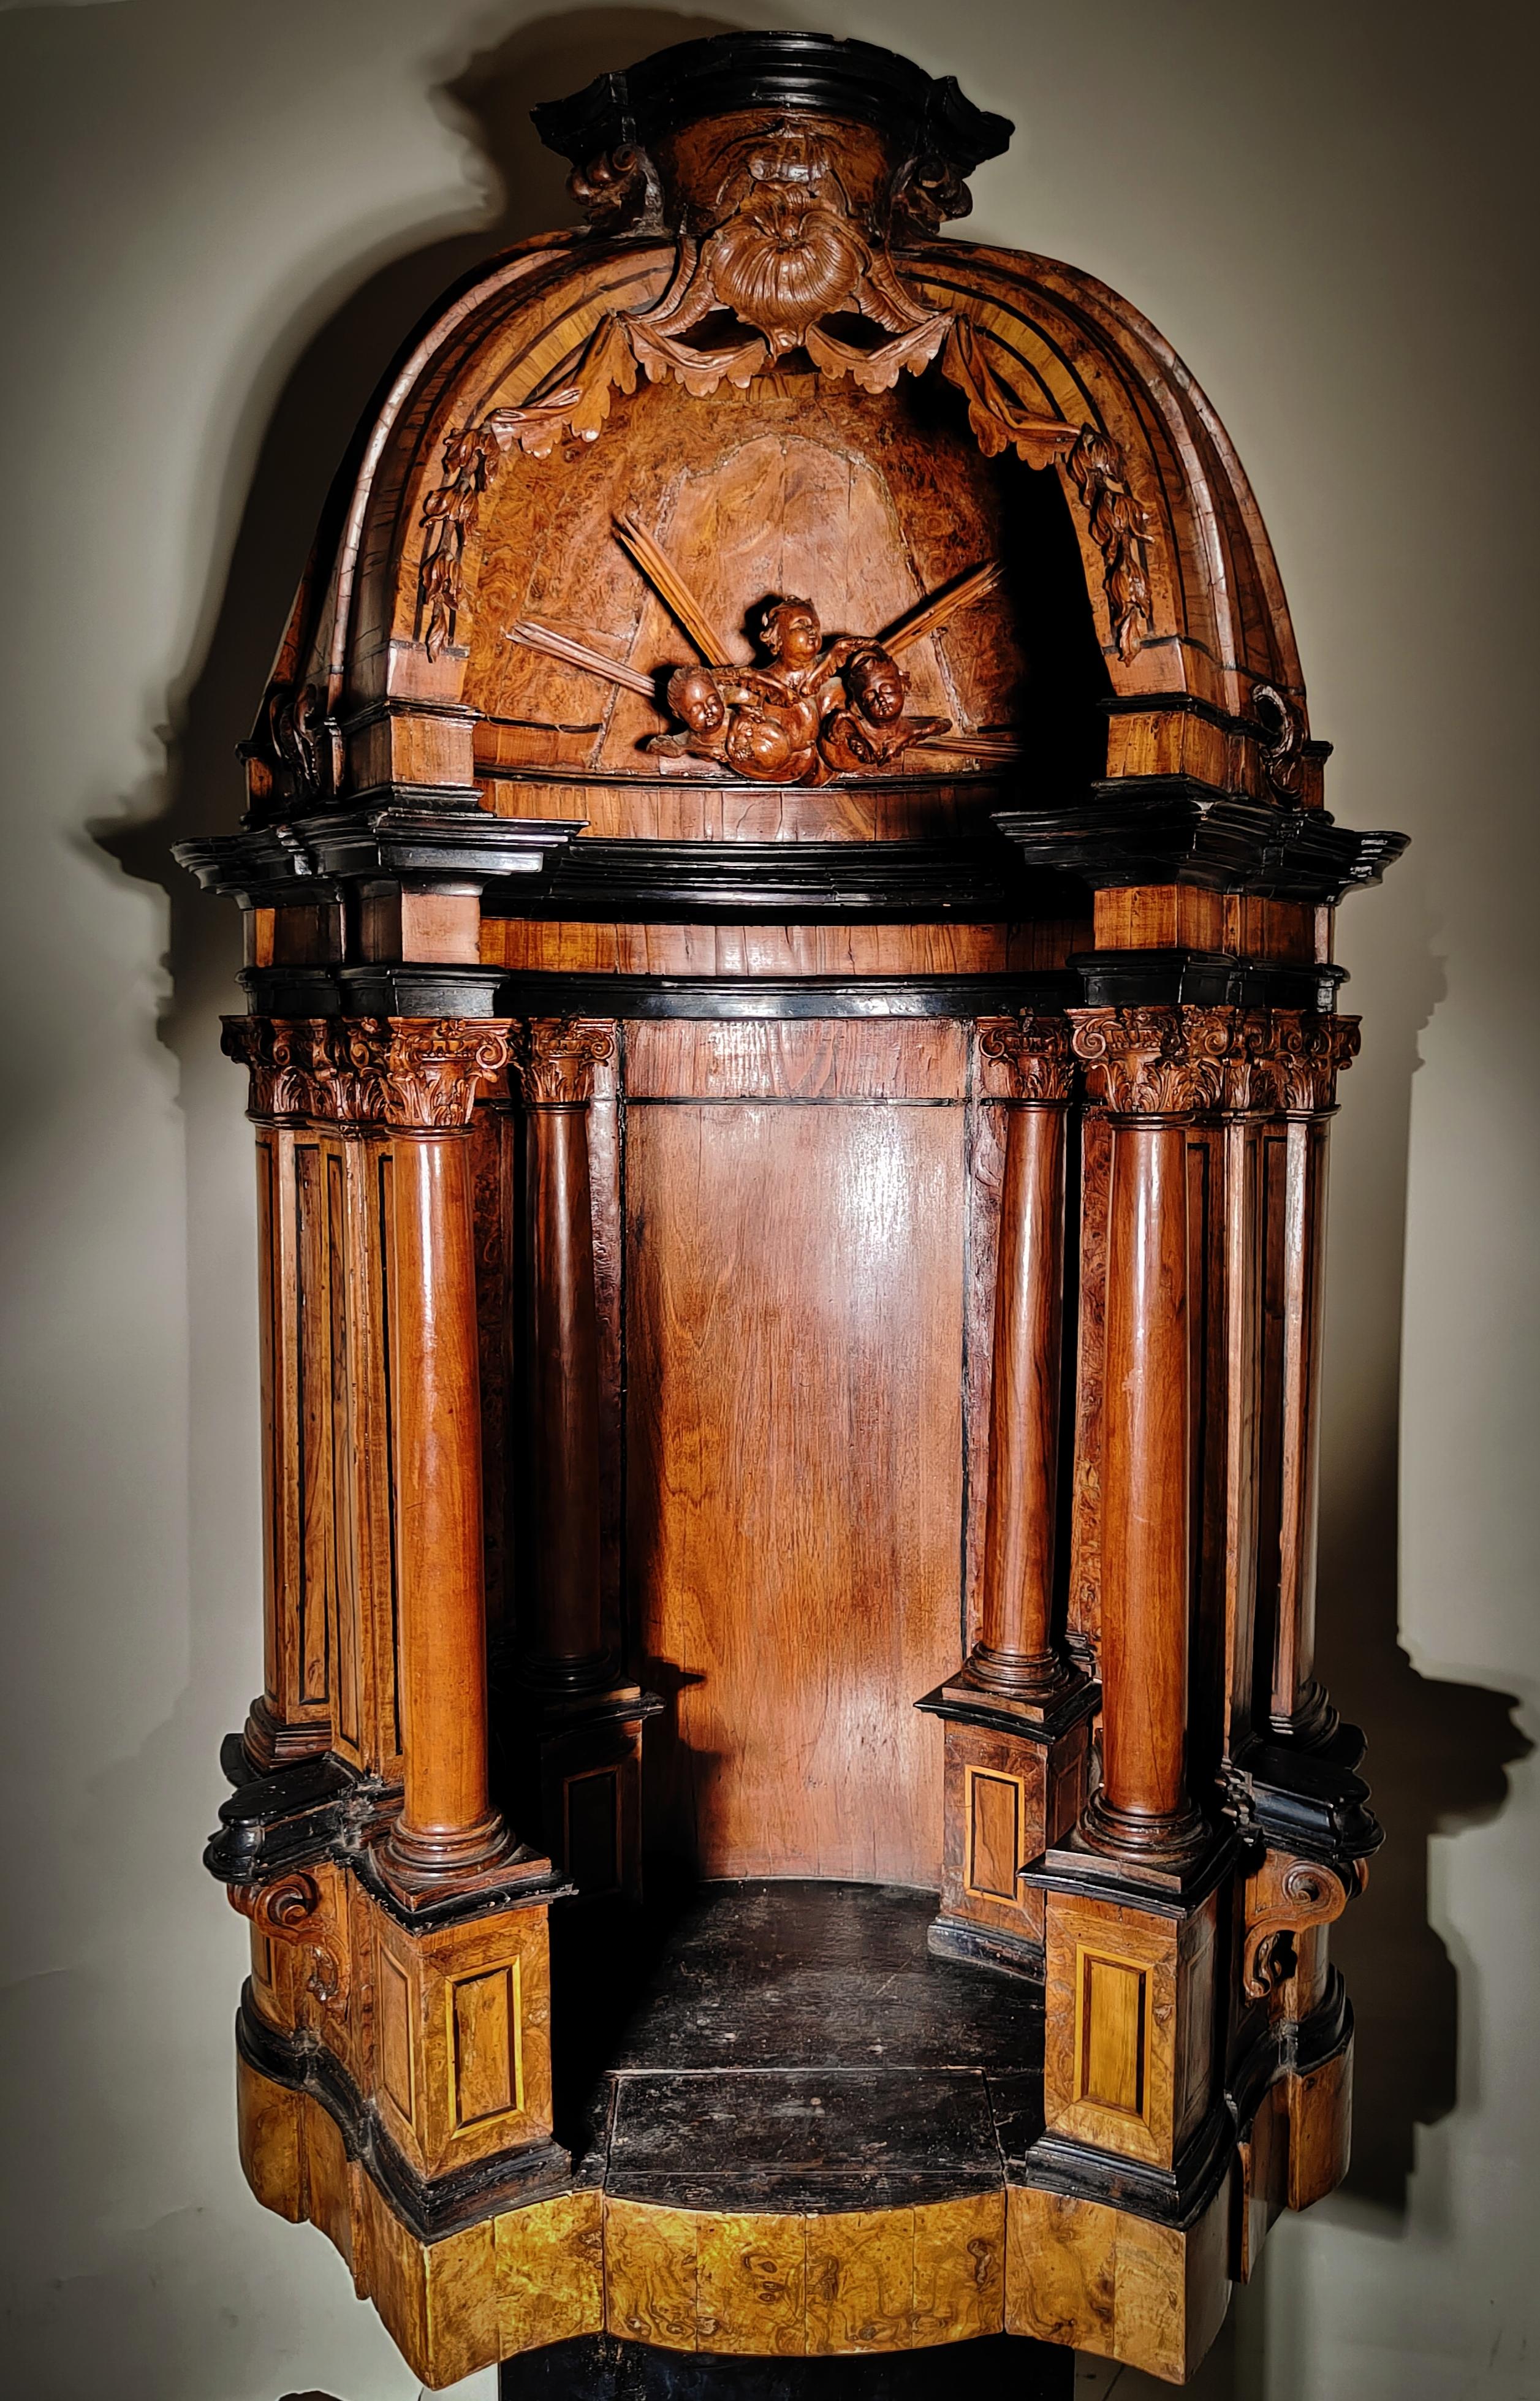 Important German Tabernacle Museum Piece 16th-17th century
IMPORTANT GERMAN TABERNACLE IN MUSEUM 16TH-17TH CENTURY EXCEPTIONAL SOUTHERN GERMAN TABERNACLE FROM THE END OF THE 16TH CENTURY BEGINNING OF THE 17TH CENTURY. IT IS MADE OF FRUIT WOOD WITH